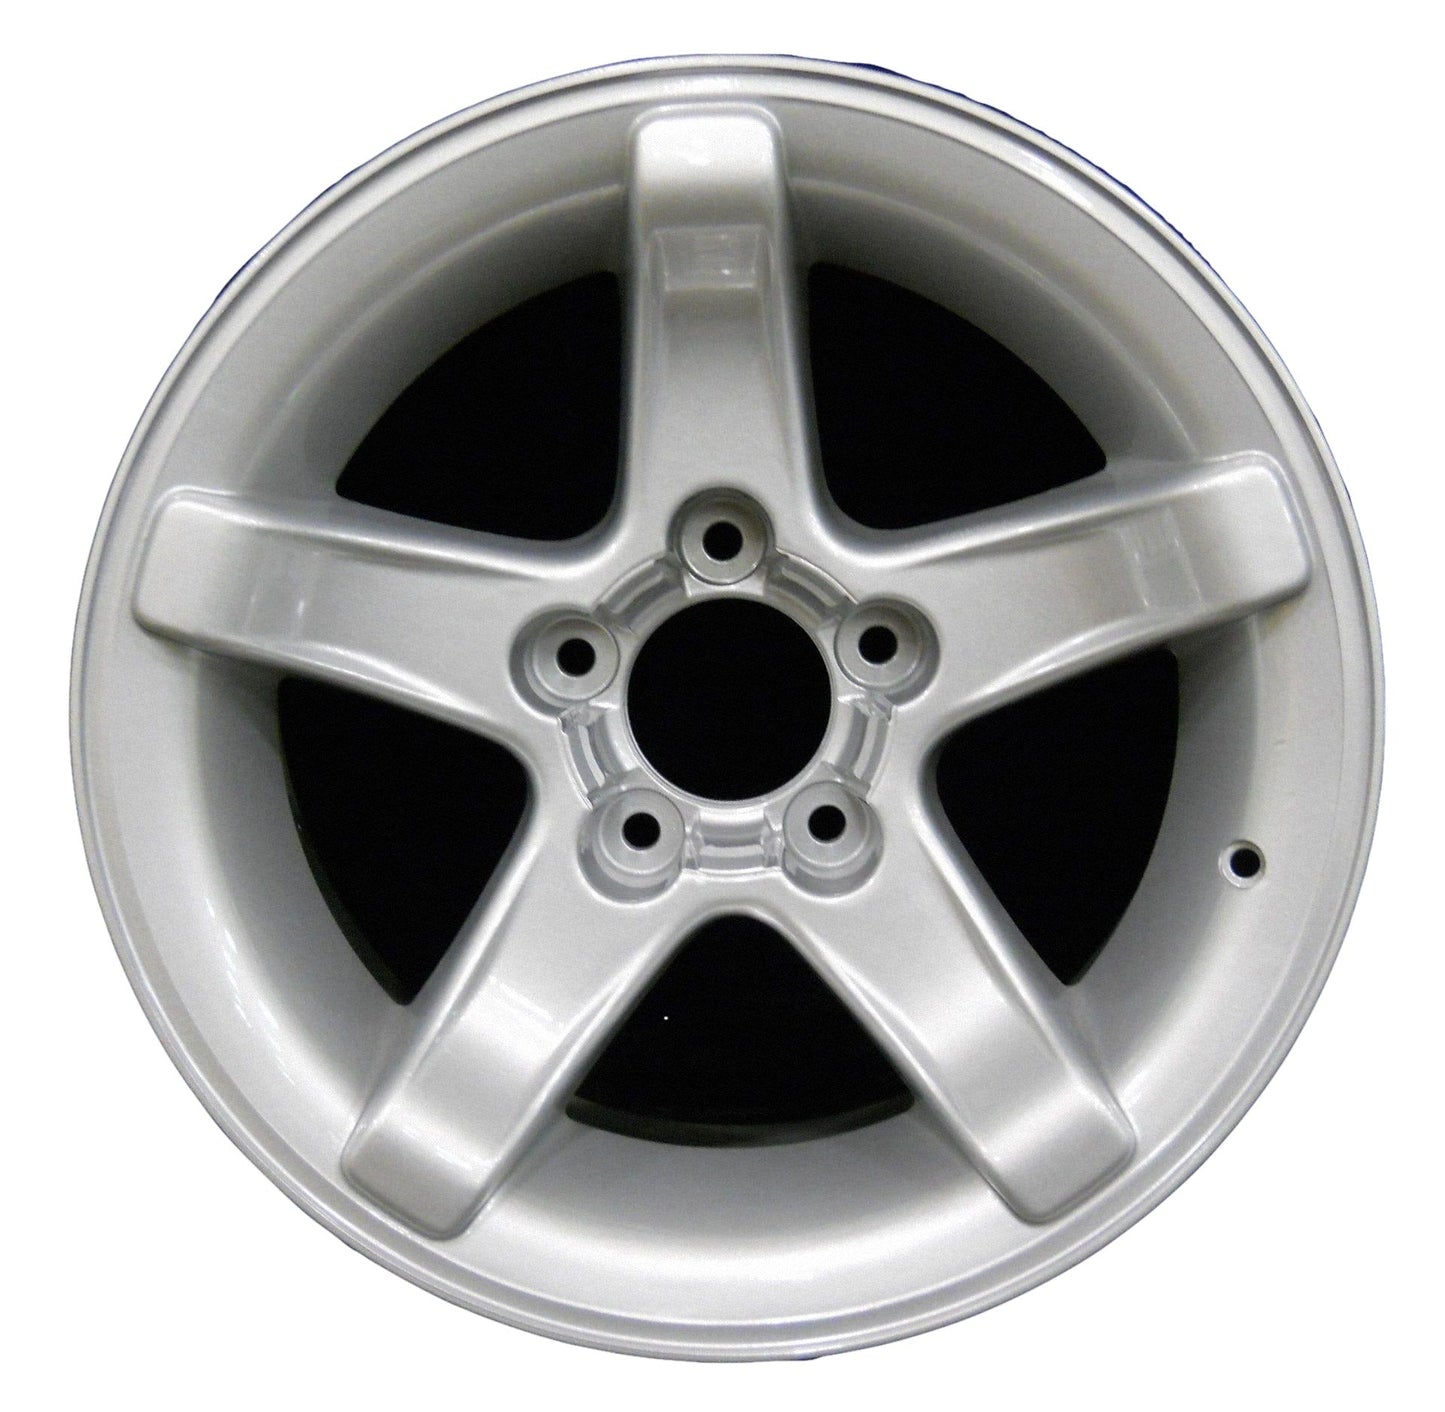 Ford F150 Truck  2000, 2001 Factory OEM Car Wheel Size 18x9.5 Alloy WAO.3401.PS02.FF